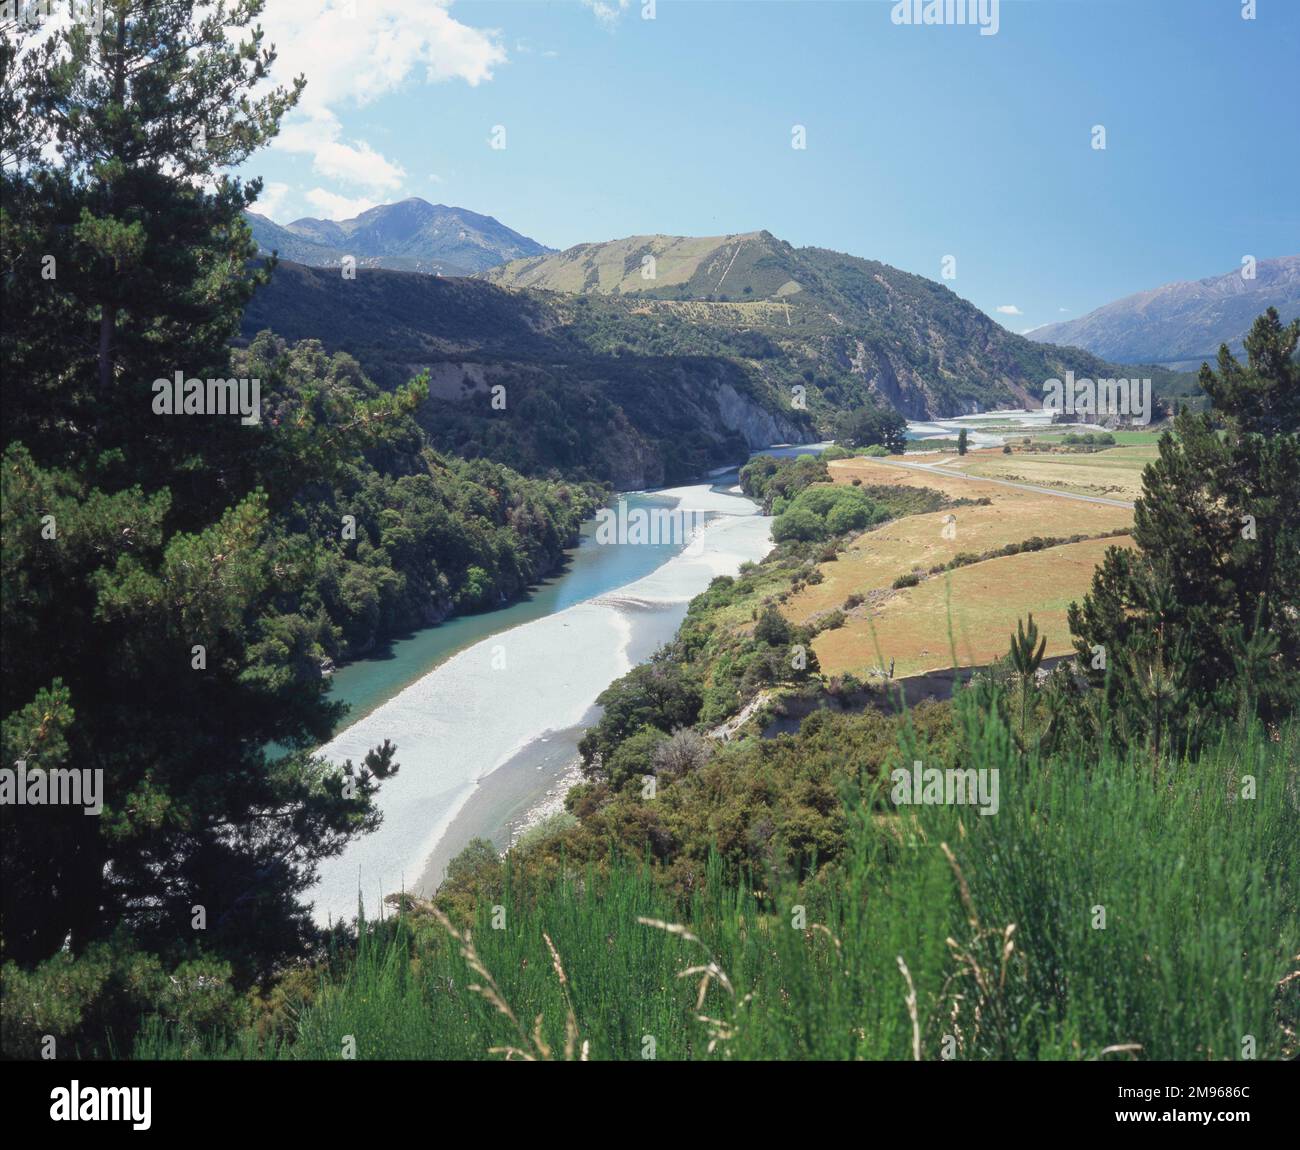 Landscape with the Lewis Pass and the Maruia River, near Maruia Springs, South Island, New Zealand. Stock Photo